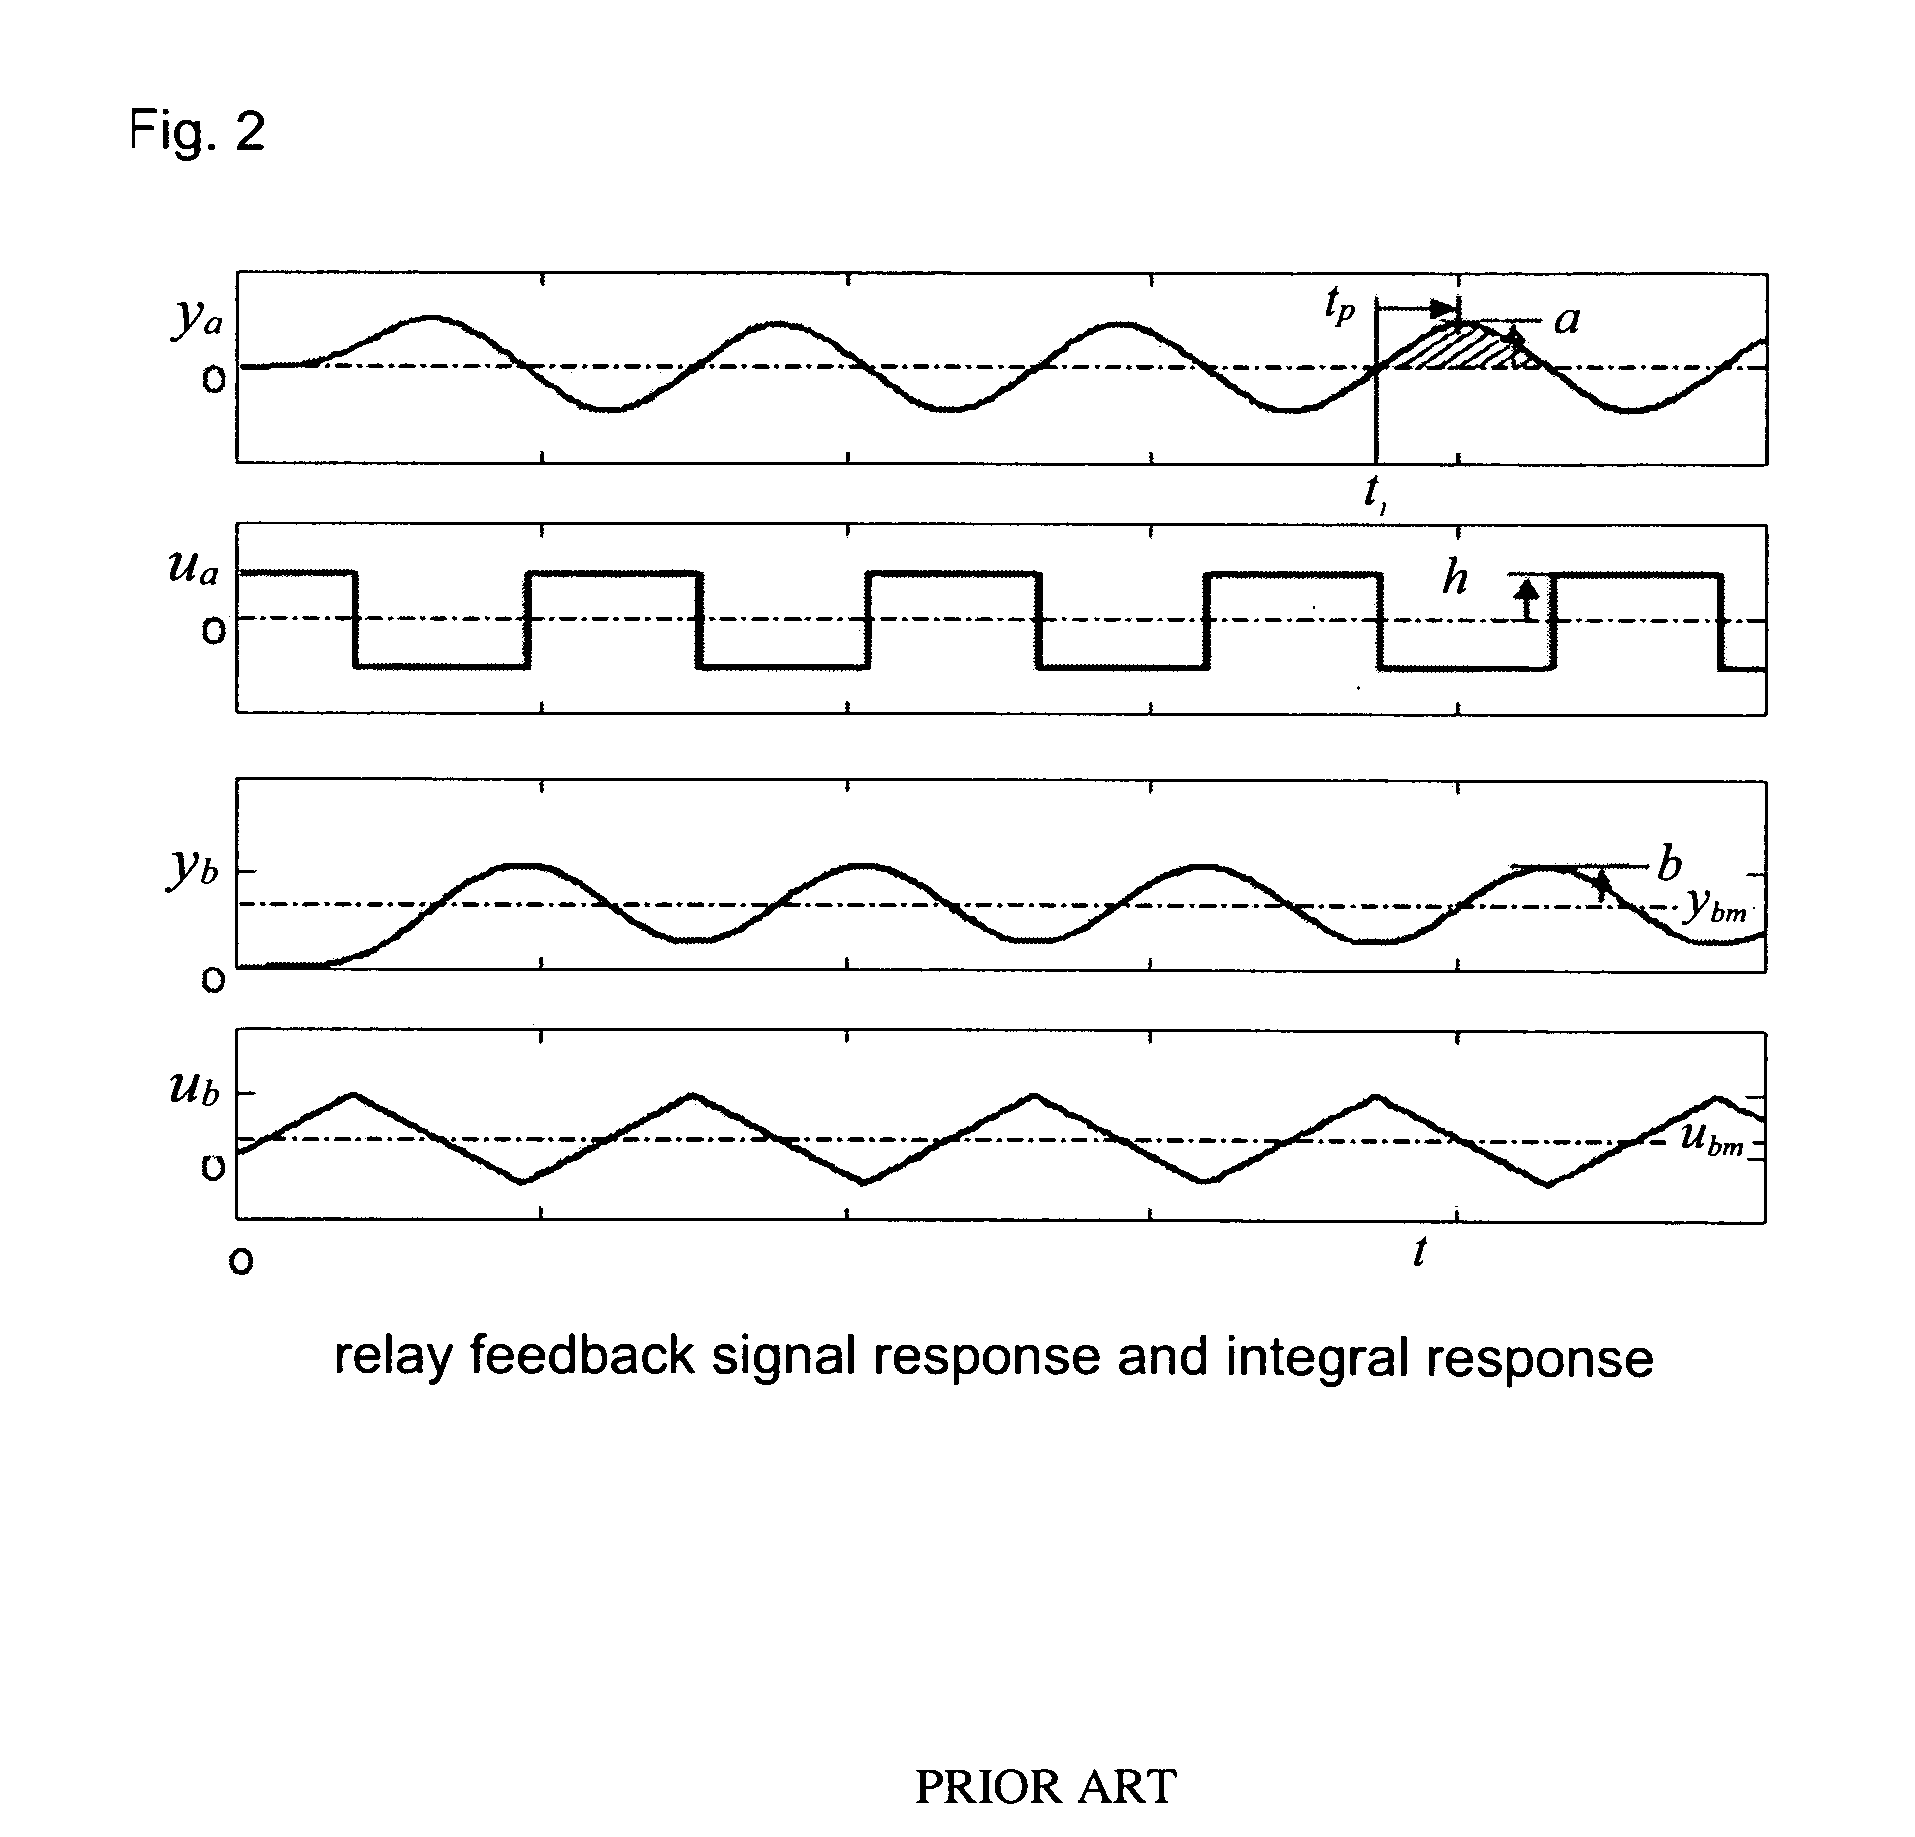 Autotuning method using integral of relay feedback response for extracting process information